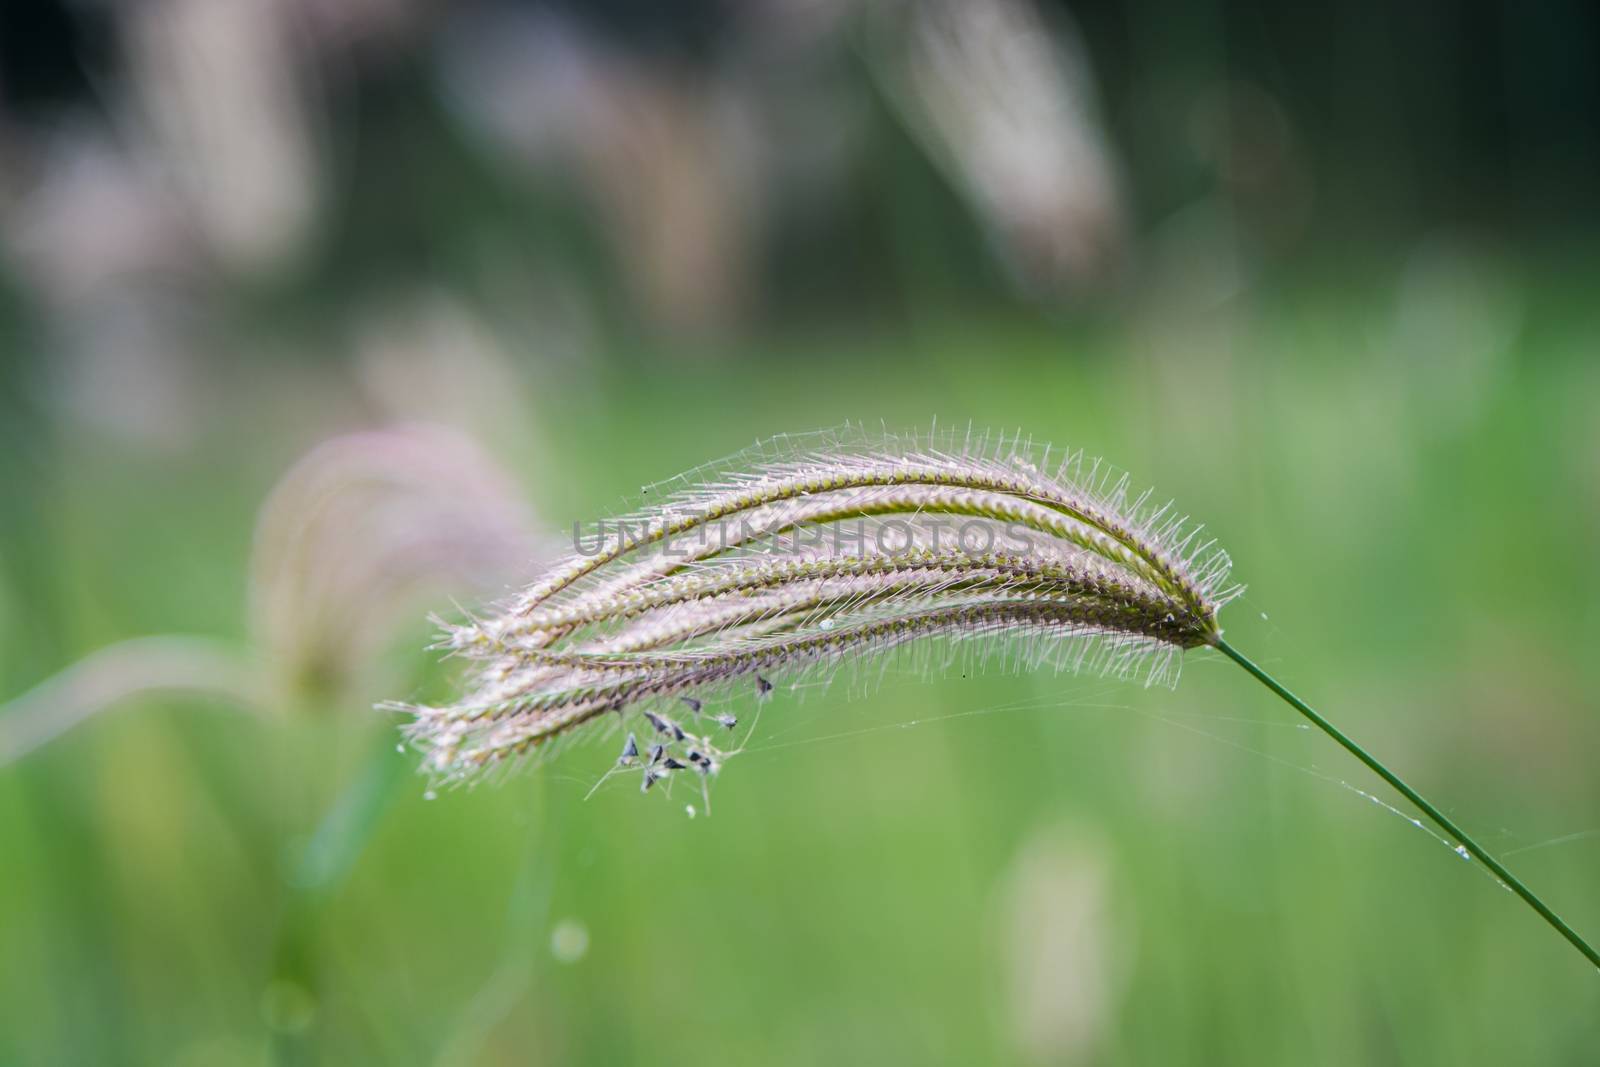 The Select focus of grass flower with blur background by peerapixs